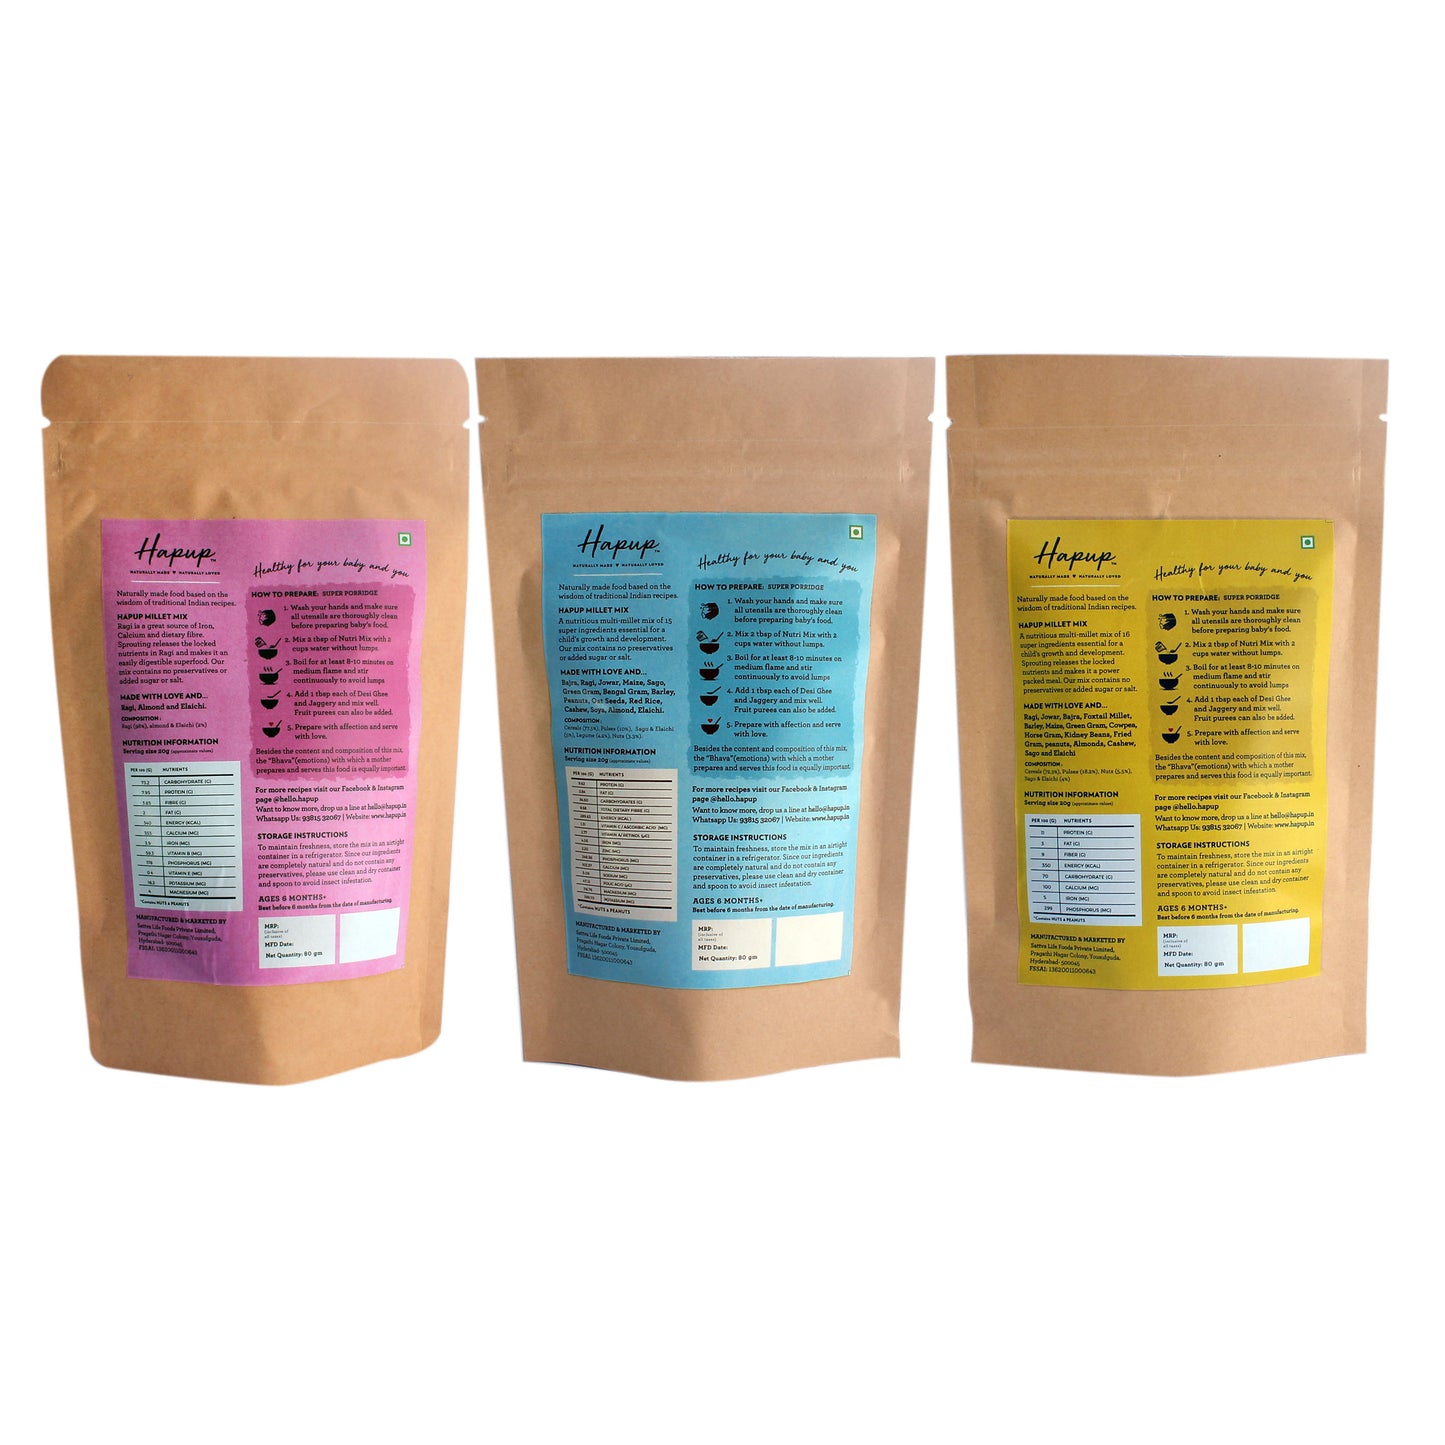 Hapup Combo Pack - Millet Mix Sprouted, Millet Mix, Ragi Mix Sprouted (80g Each)